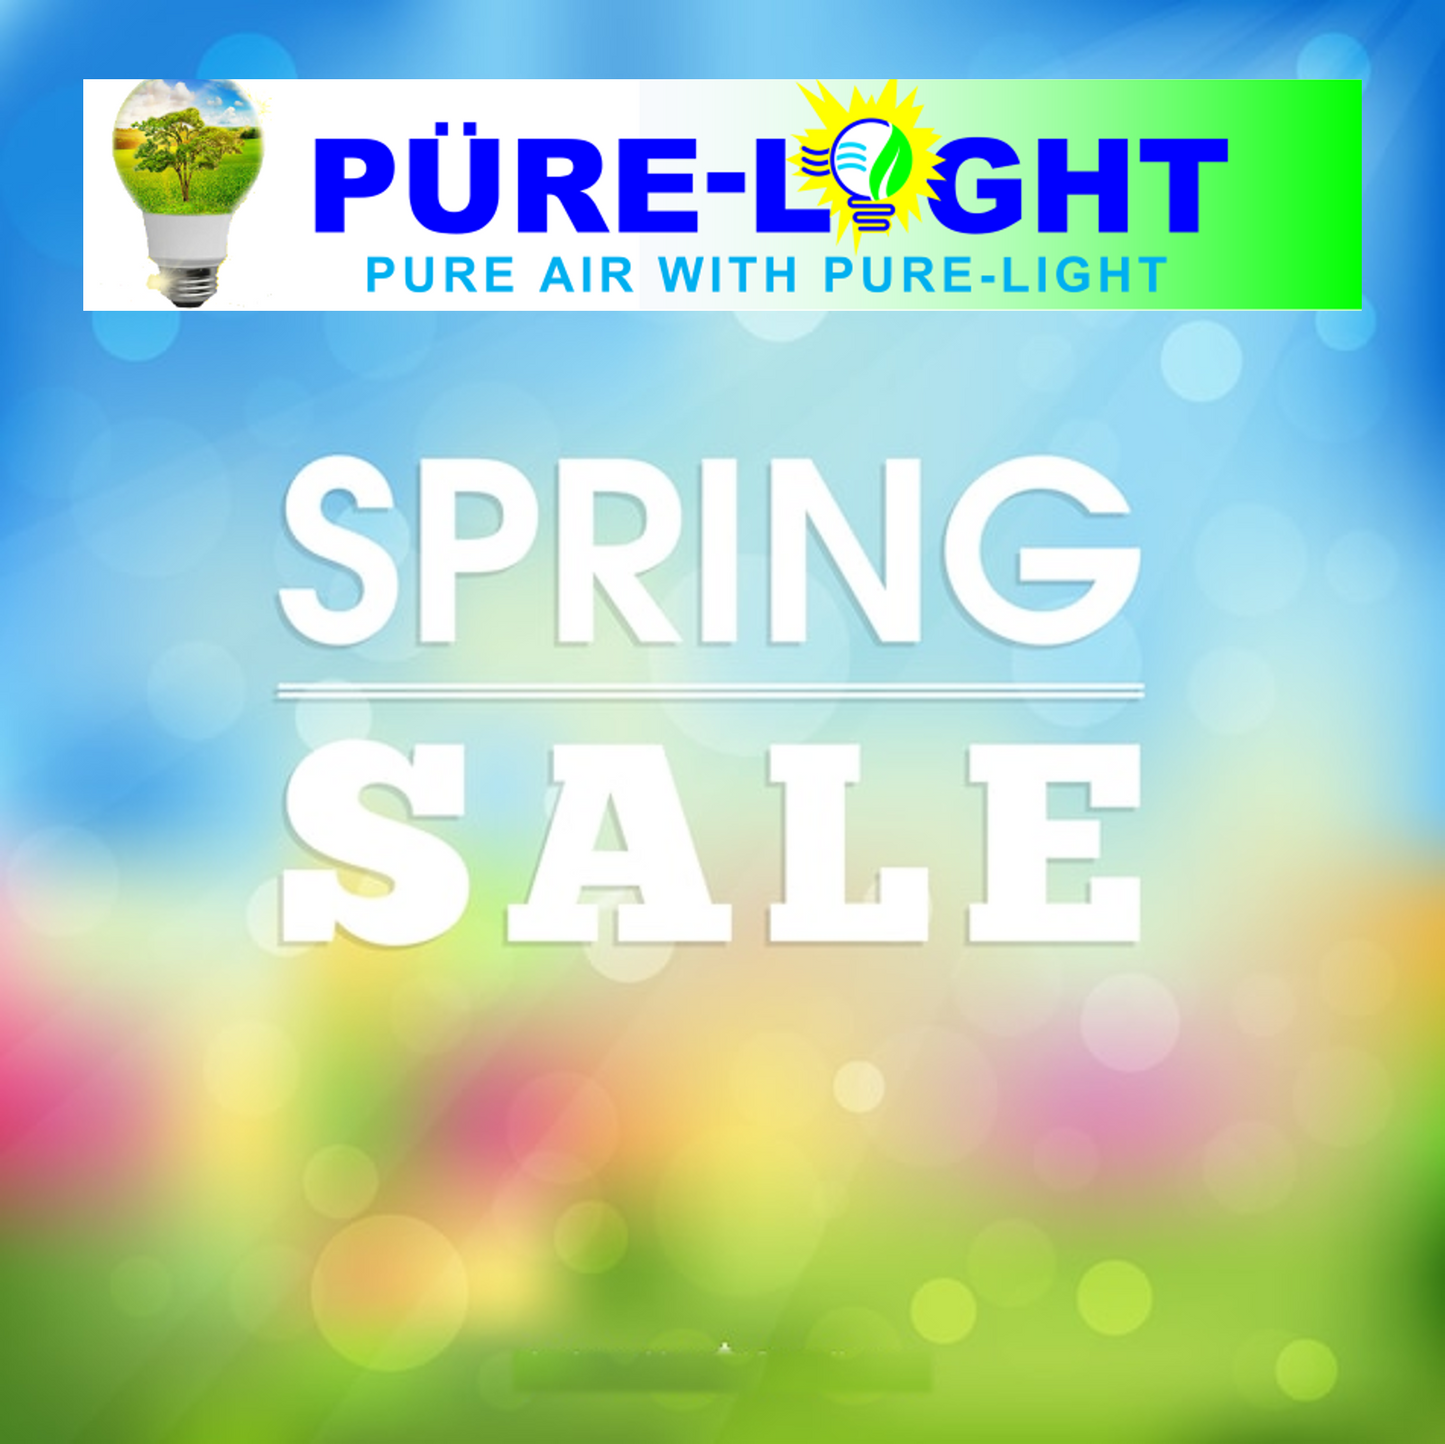 SPRING FLING SUPER DISCOUNT   30% OFF $100 + FREE SHIPPING!!